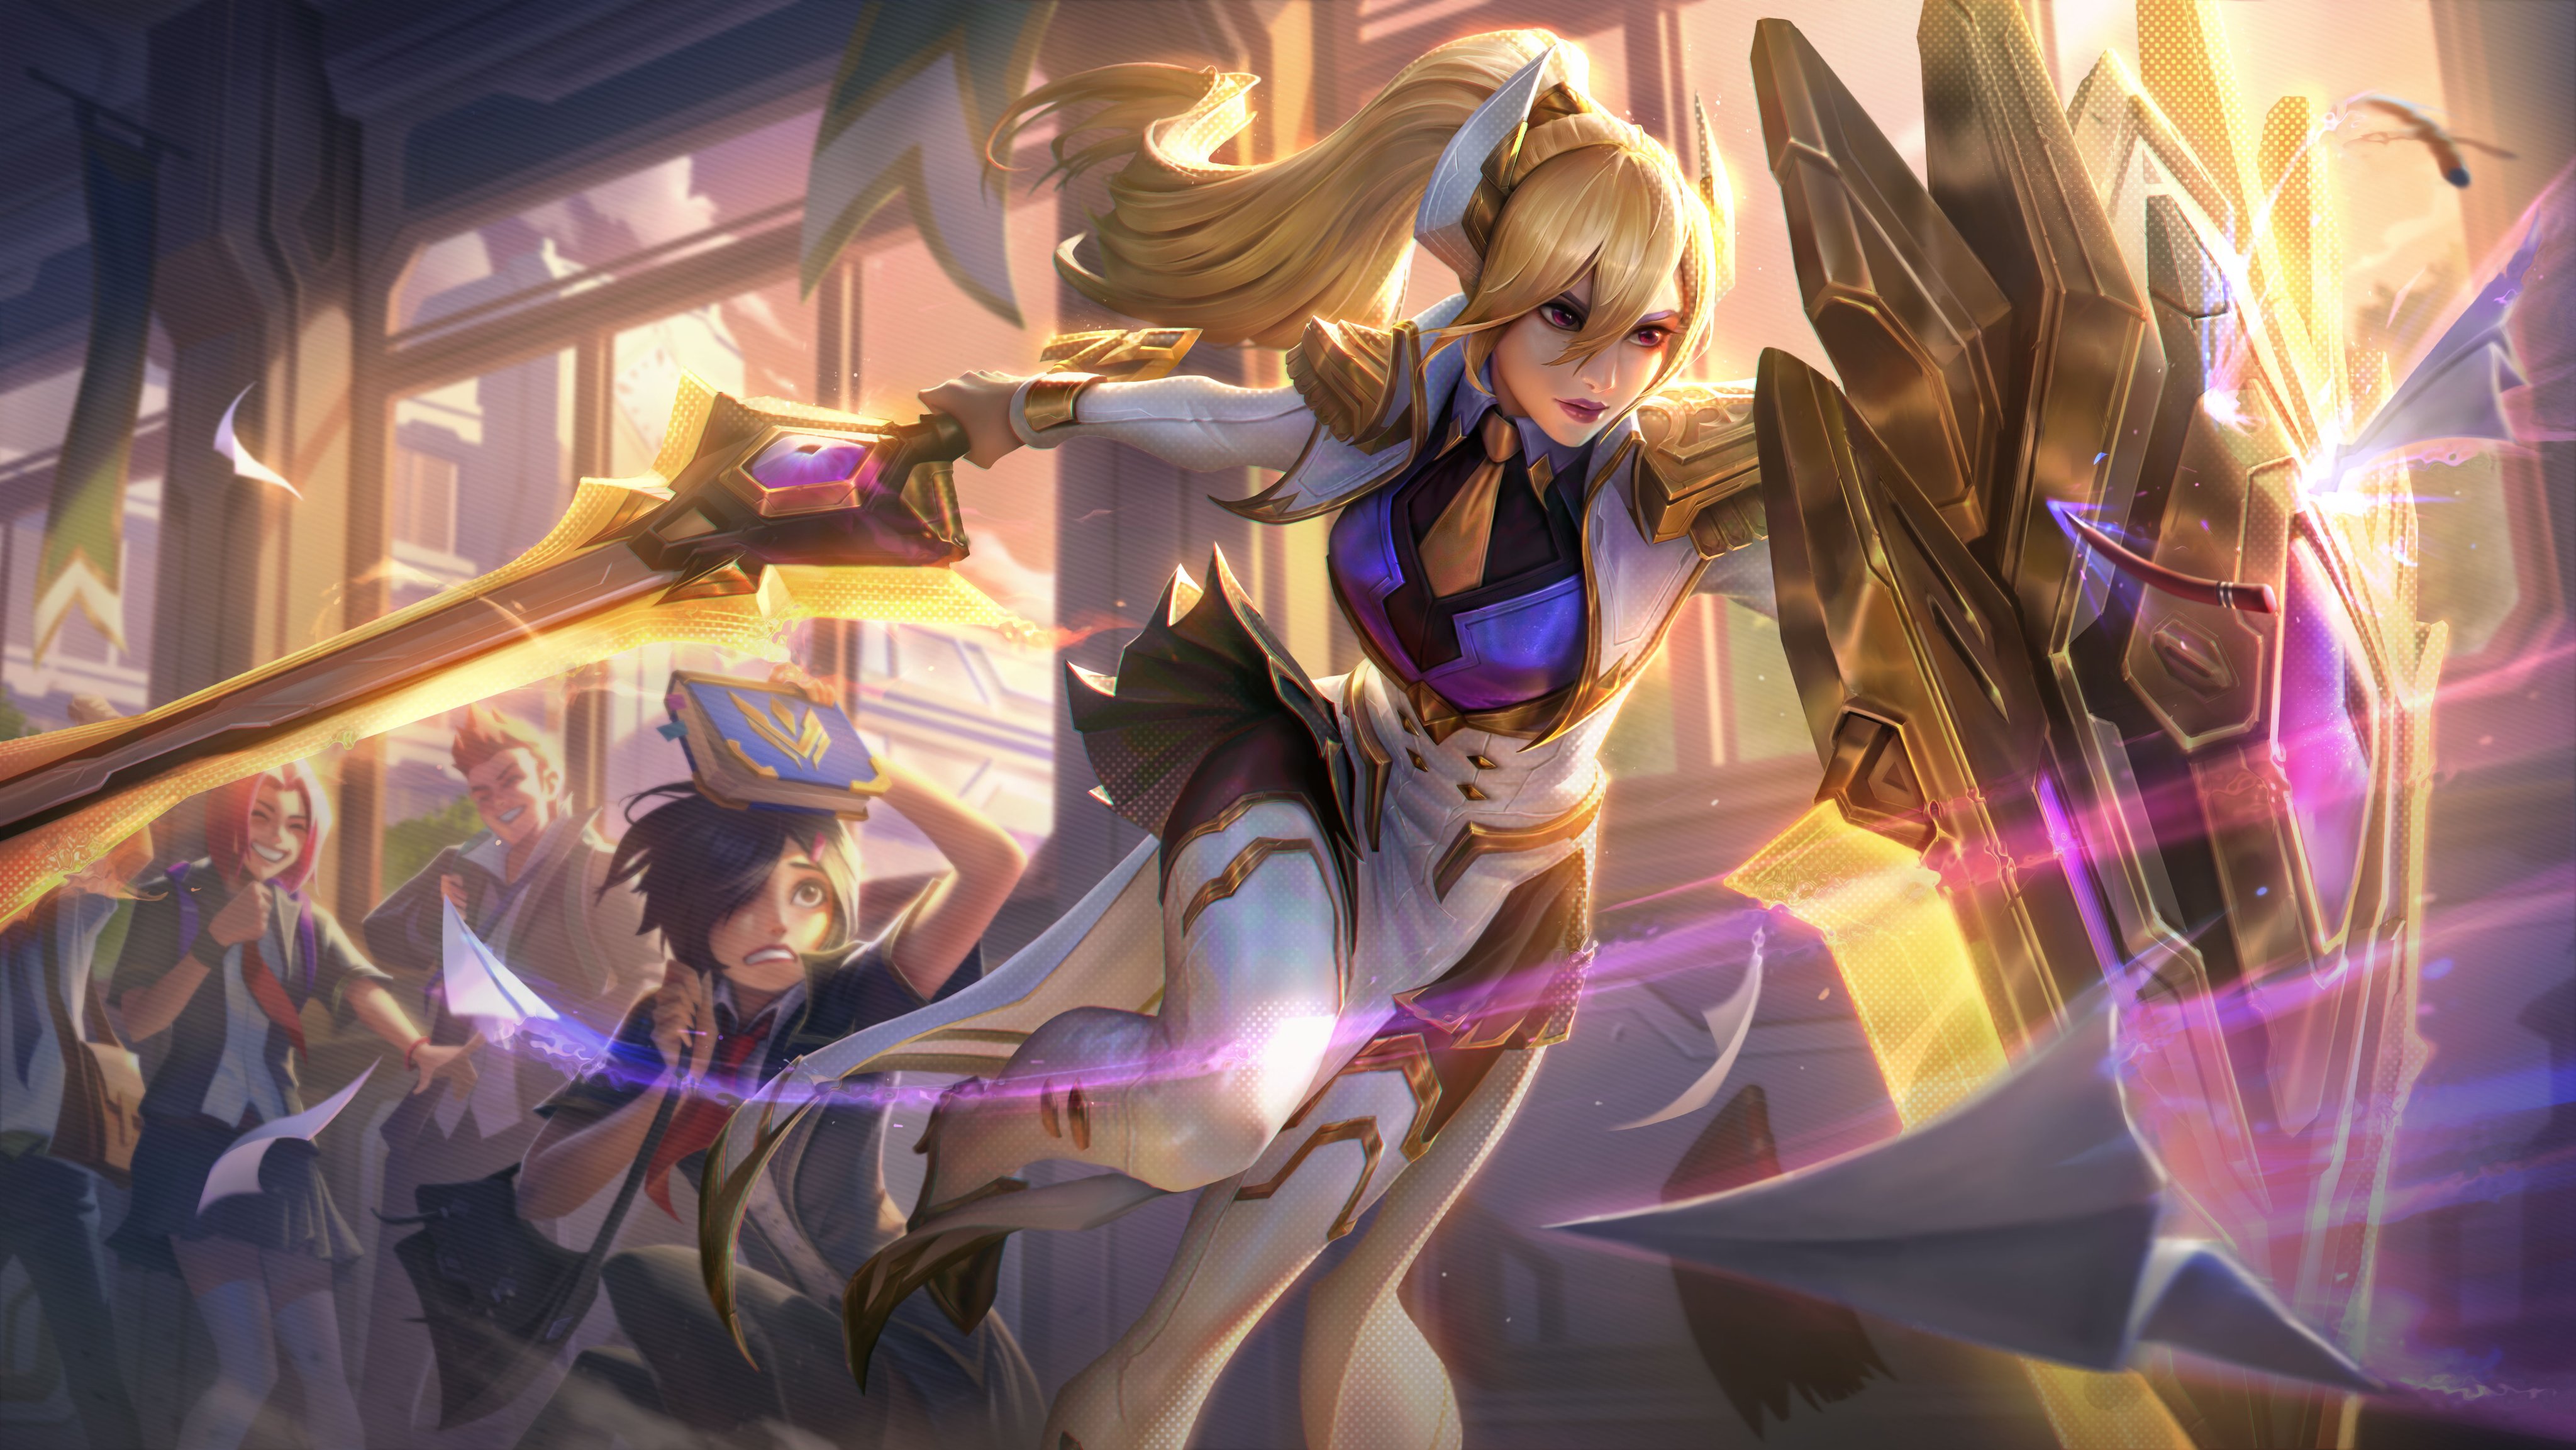 General 4096x2305 Leona (League of Legends) Battle Academia League of Legends video game art video game girls video game characters video games women sword girls with guns PC gaming shield blonde tie red eyes hair in face long hair